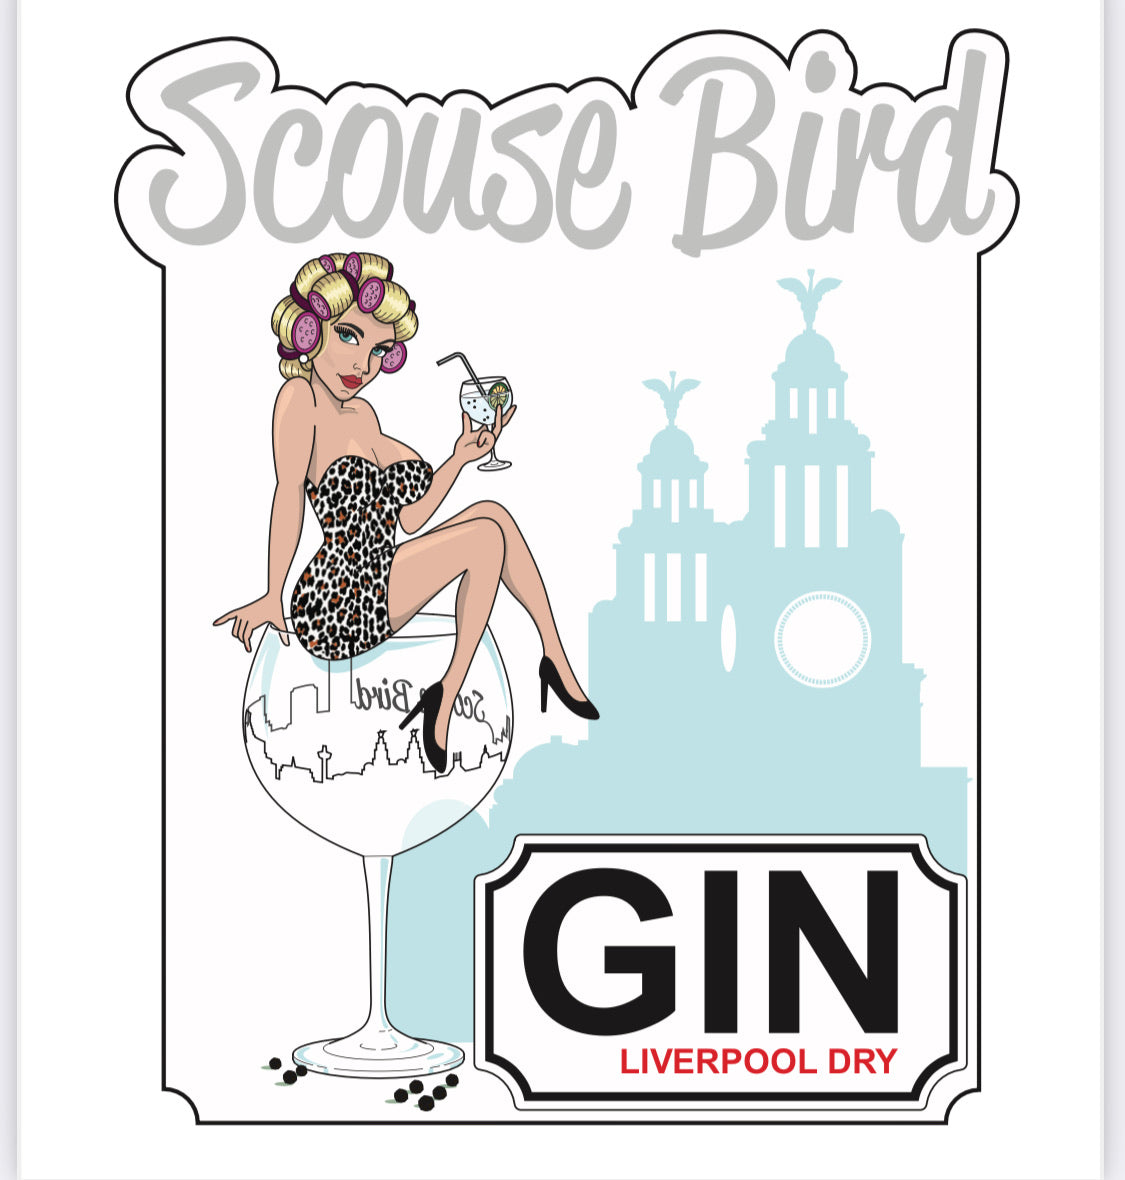 Scouse Bird Liverpool Dry Gin 70cl